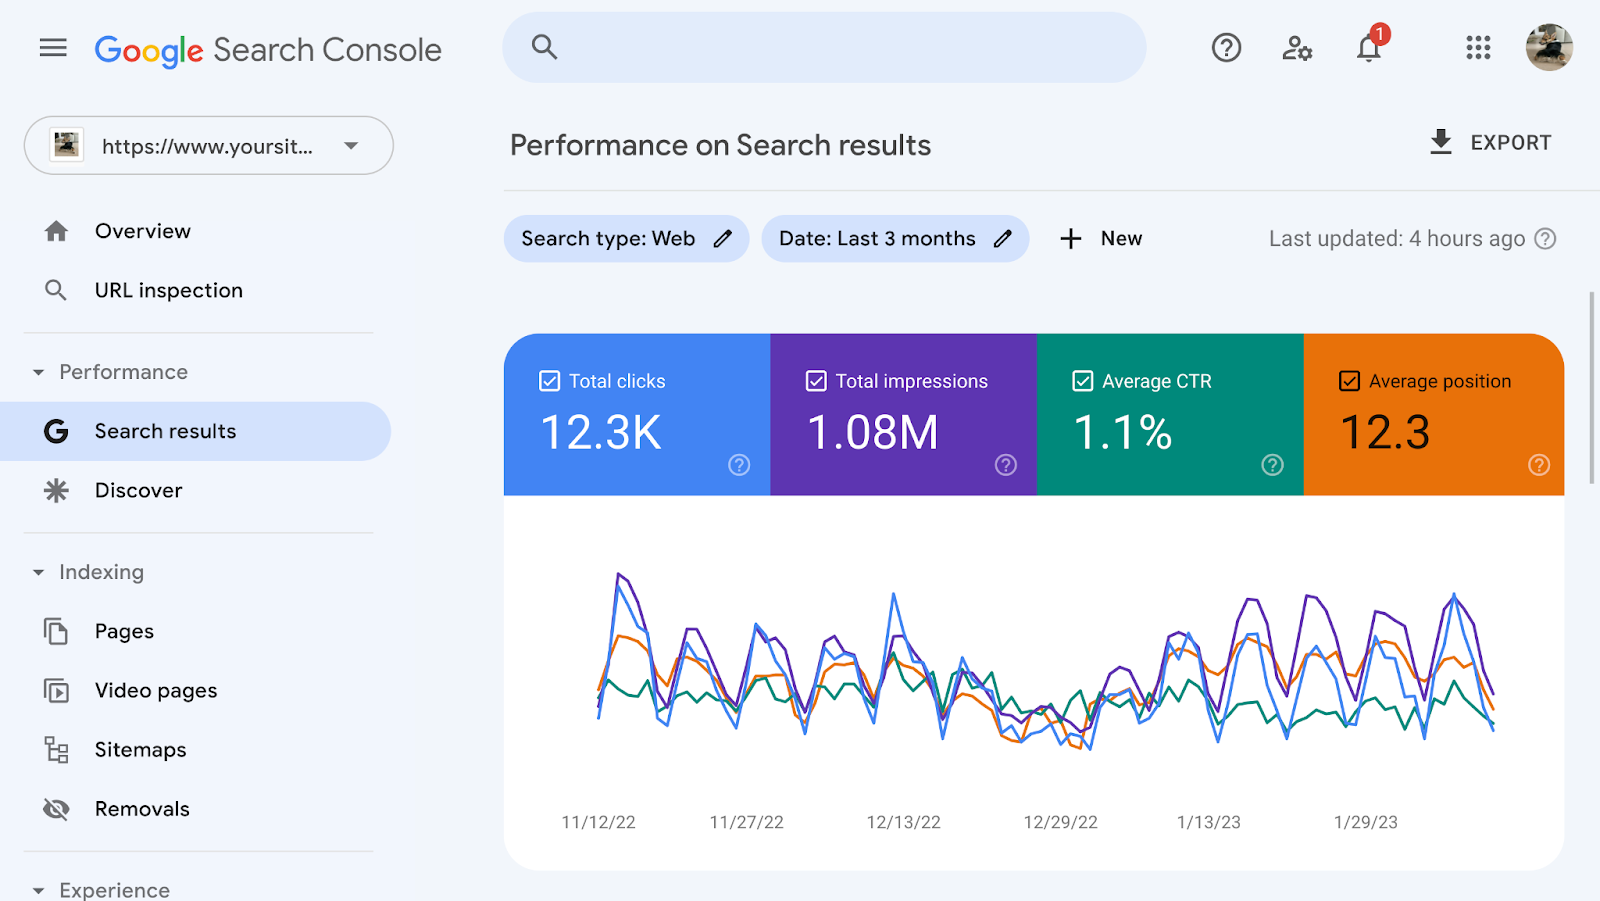 Google Search Console (GSC) page